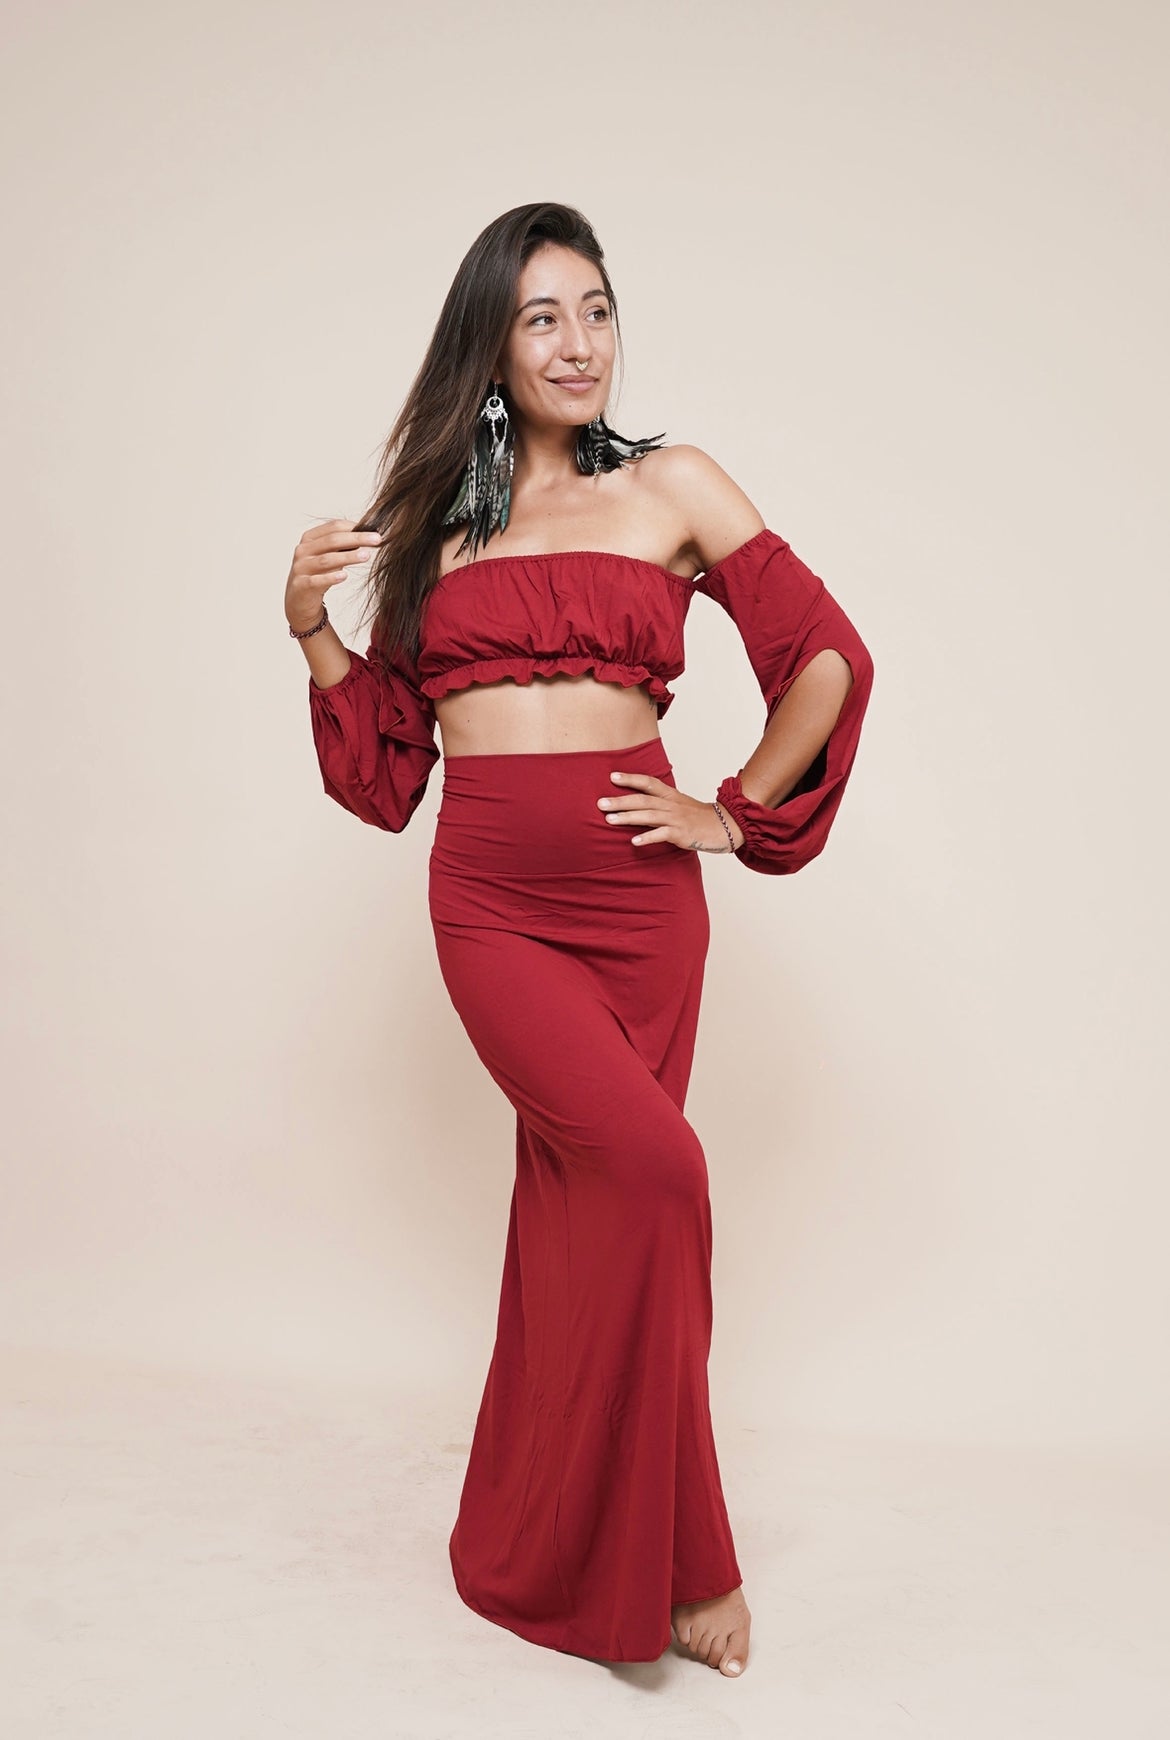 Off shoulder puffy sleeve boho top named Liberate with Enchanted high waist skirt with adjustable bow in the back in color: Scarlet, by Bohemian Goddess, goddess clothing and adornments for women.